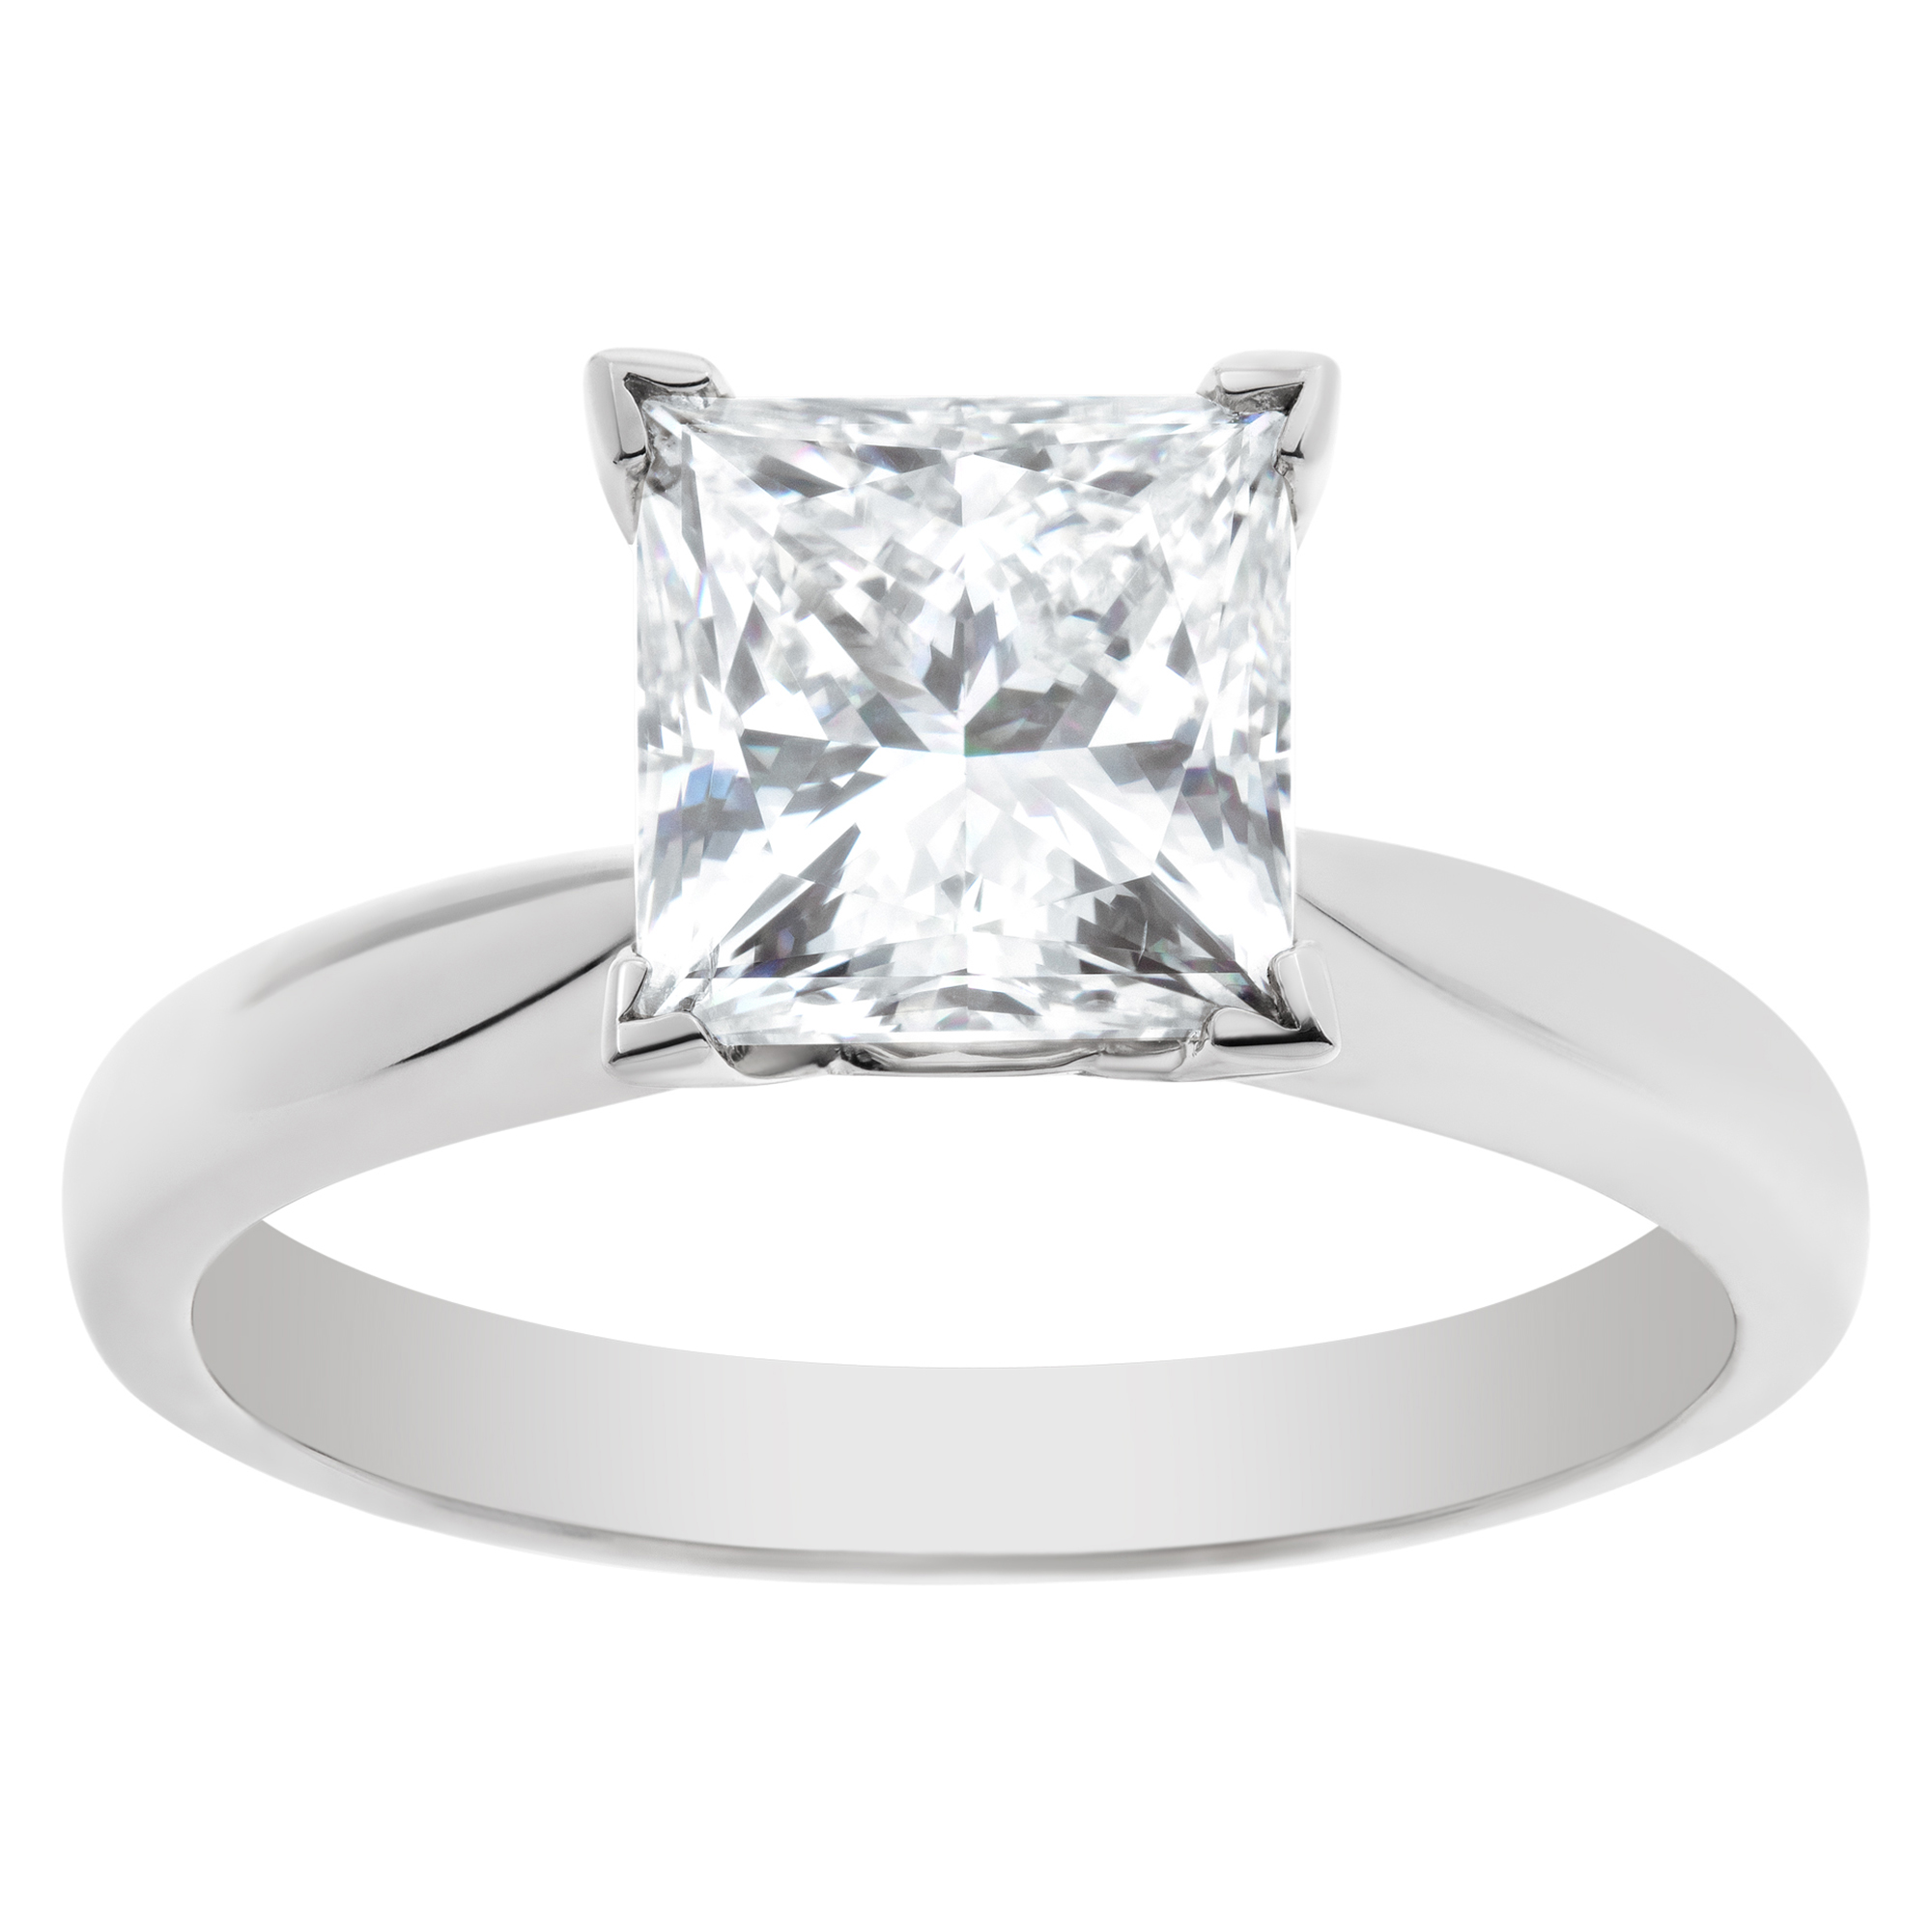 GIA certified princess cut diamond 2.09 carat (J color, SI1 clarity) solitaire ring